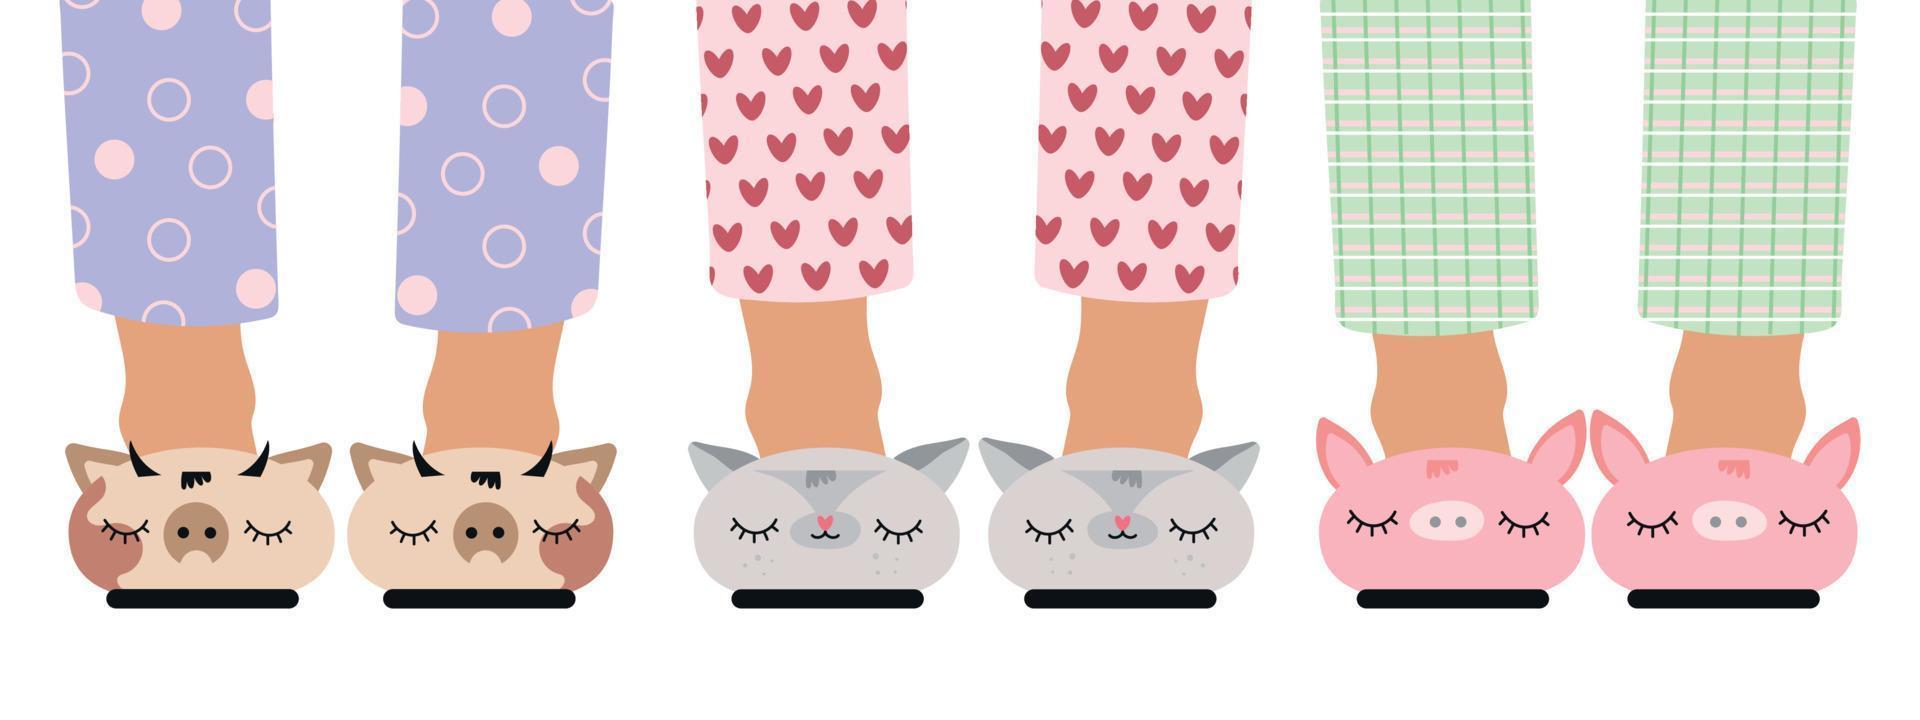 Children's feet in funny slippers. A set of children's feet in slippers with animals. Pajama party, kids holiday.Vector illustration isolated on white background. vector